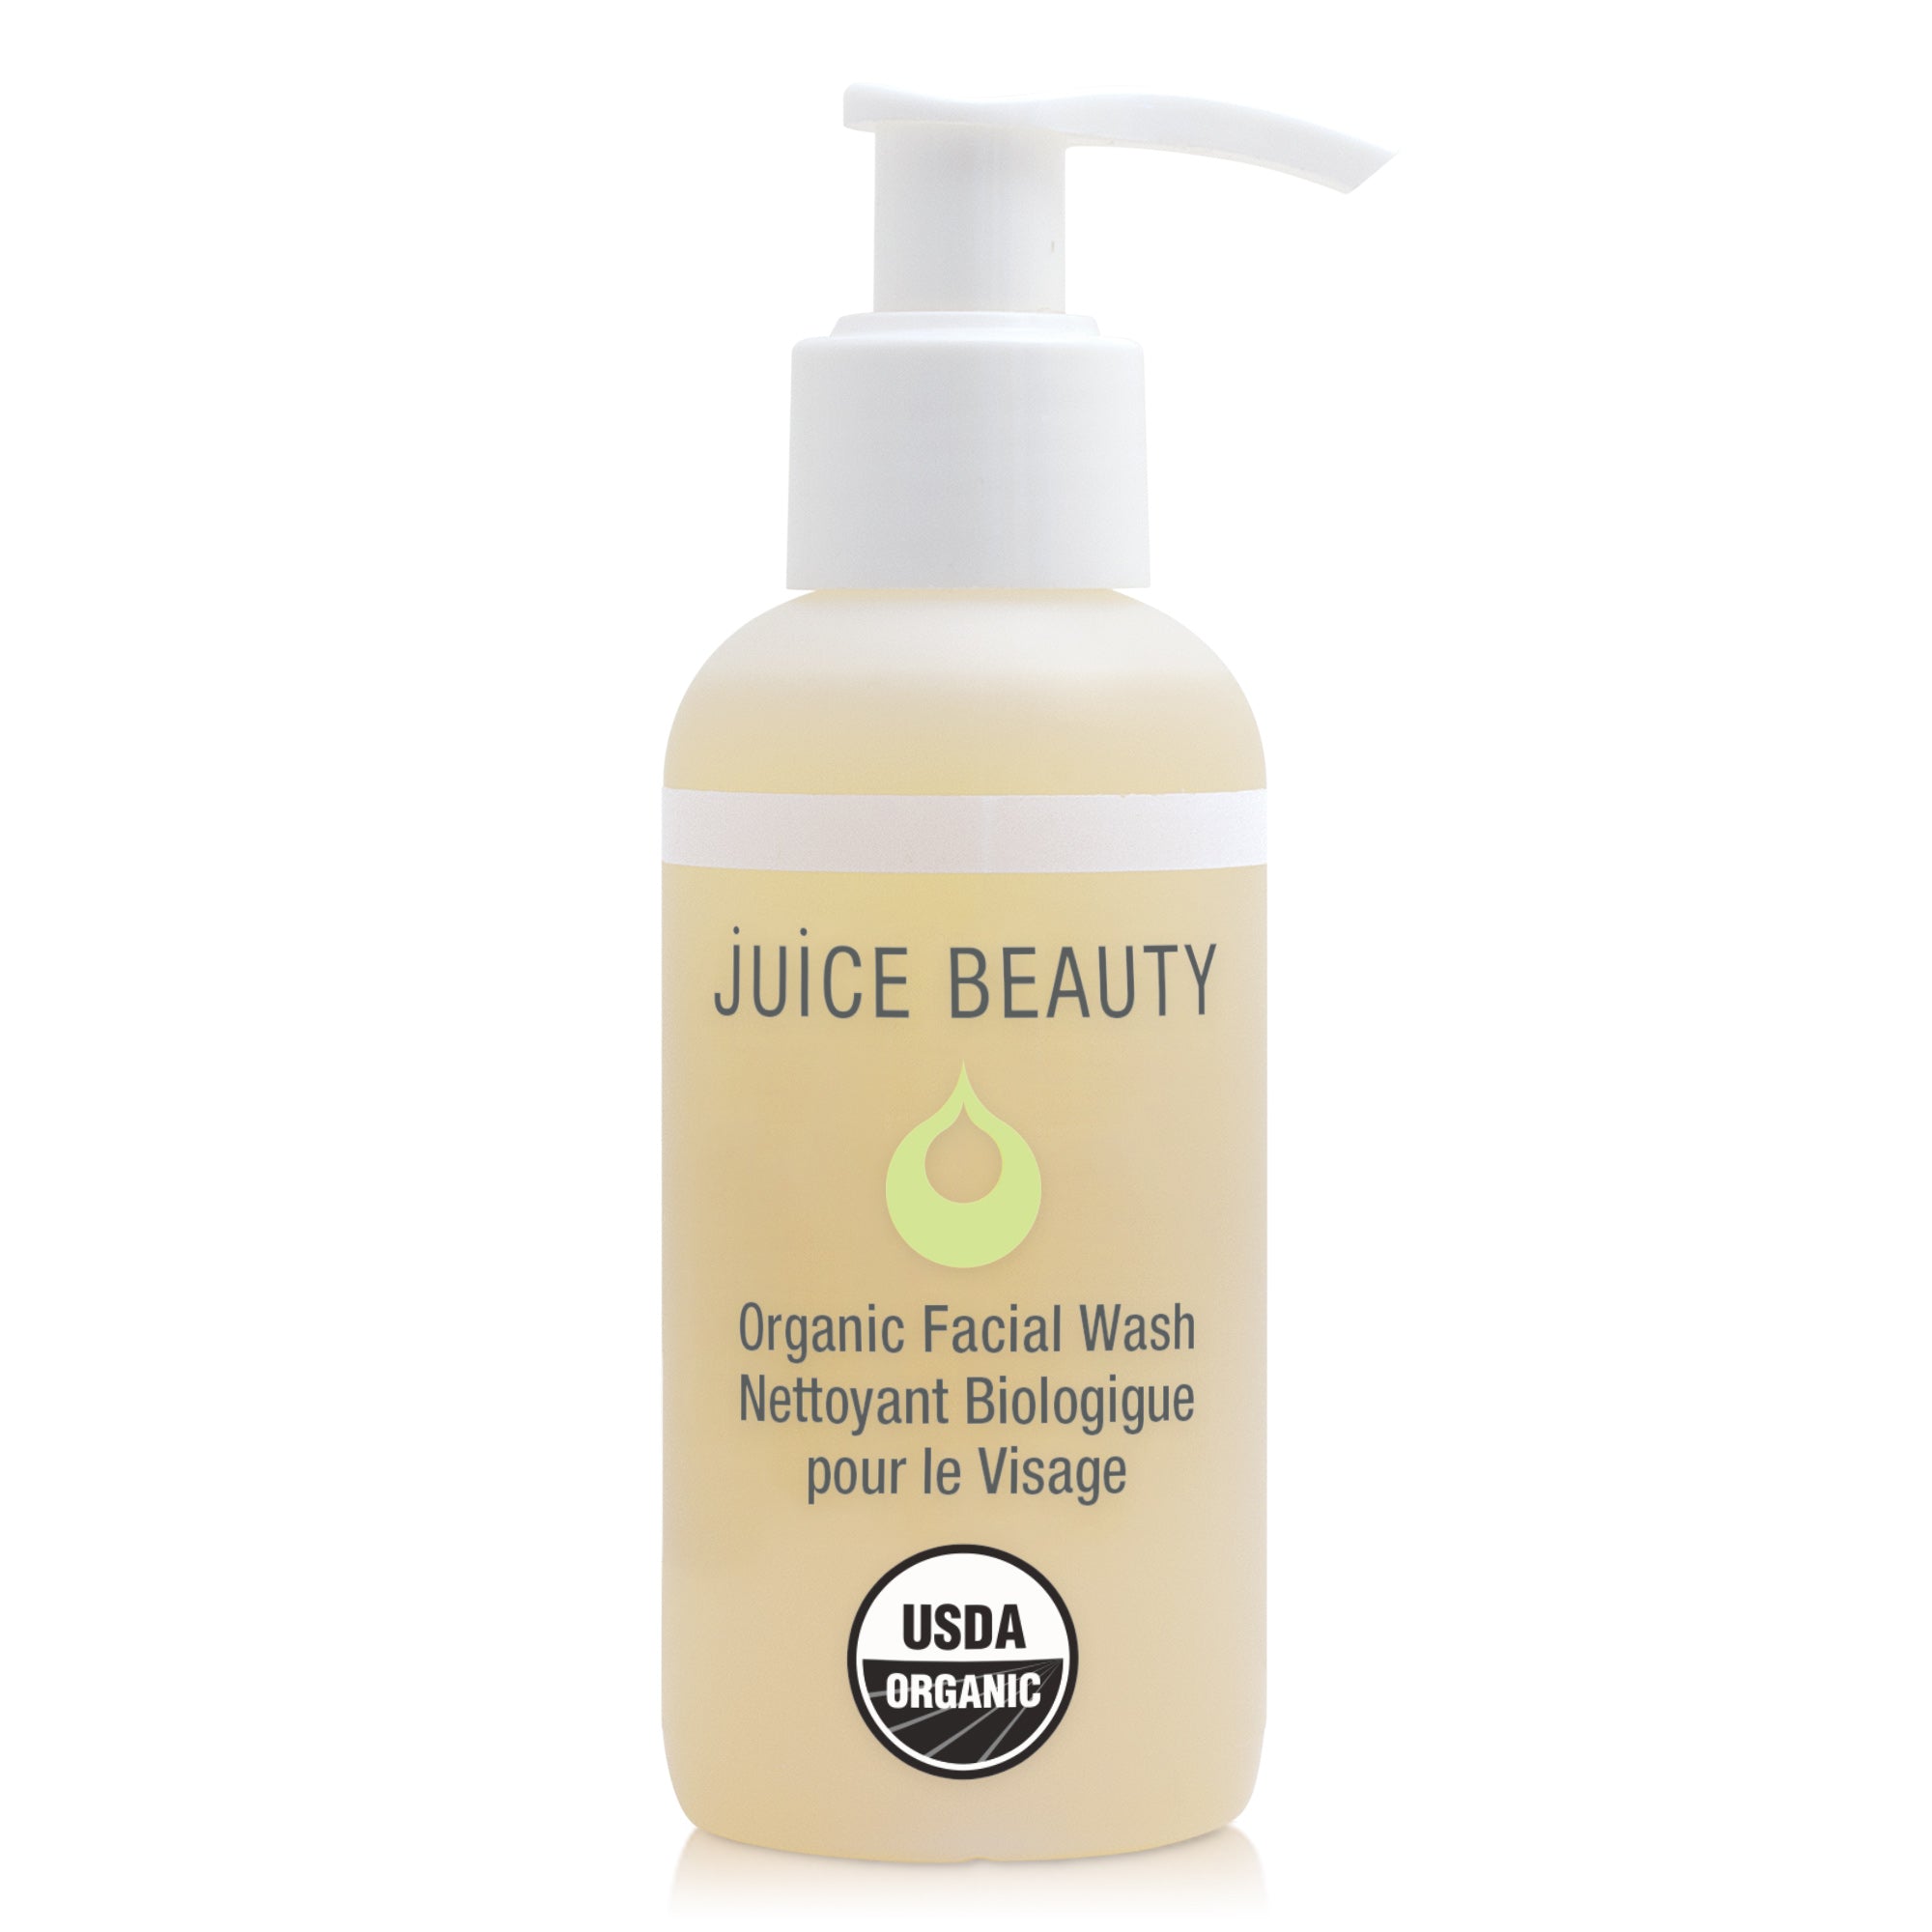 BESTSELLING Brightening & Hydrating Daily Face Wash